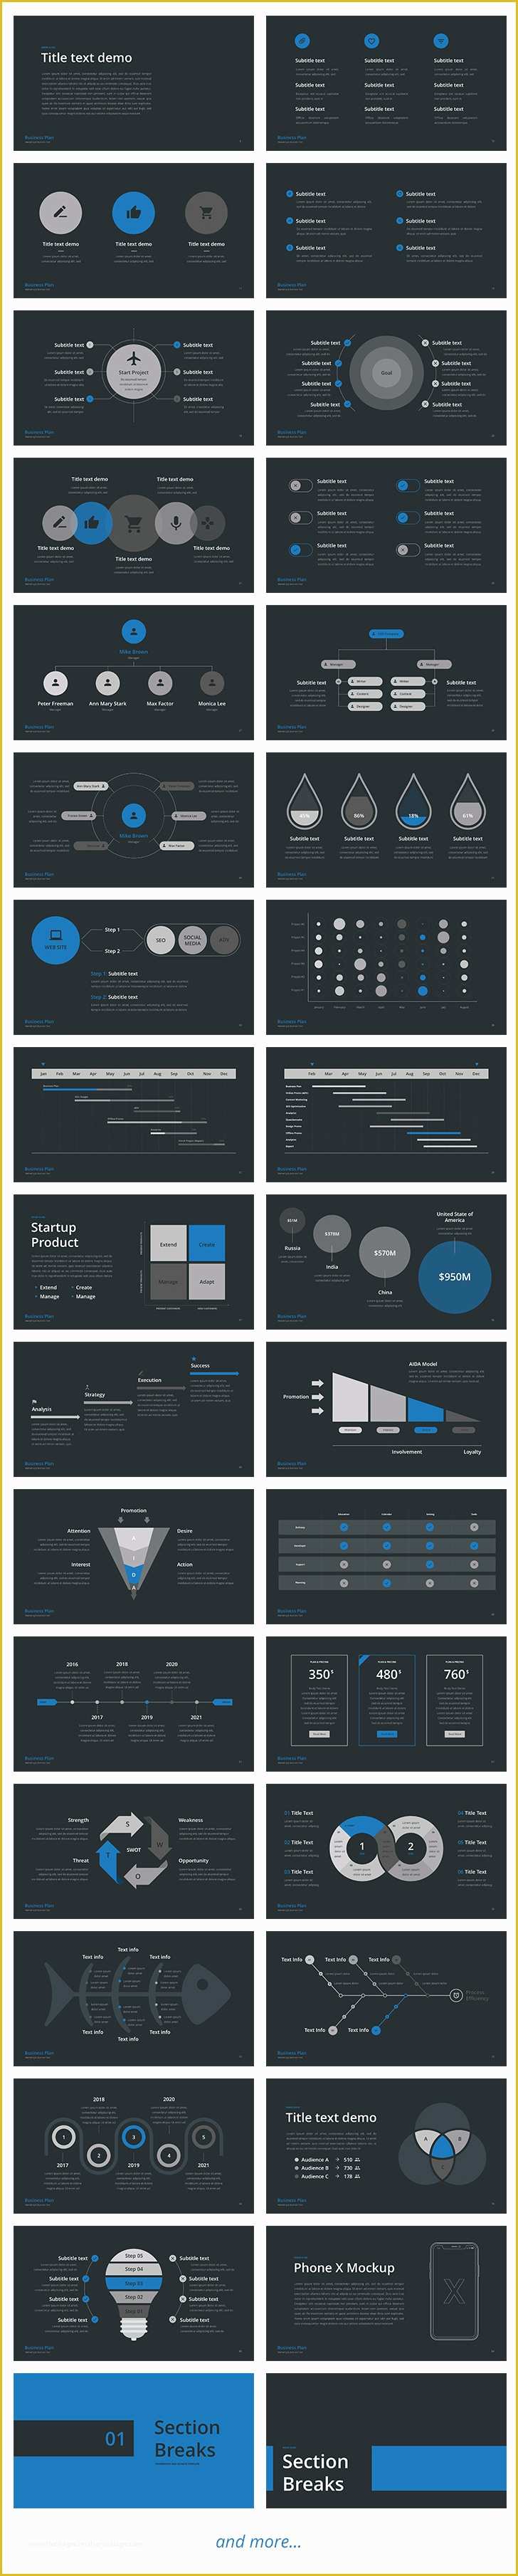 Multipurpose Powerpoint Template Free Download Of Business Plan Multipurpose Powerpoint Template